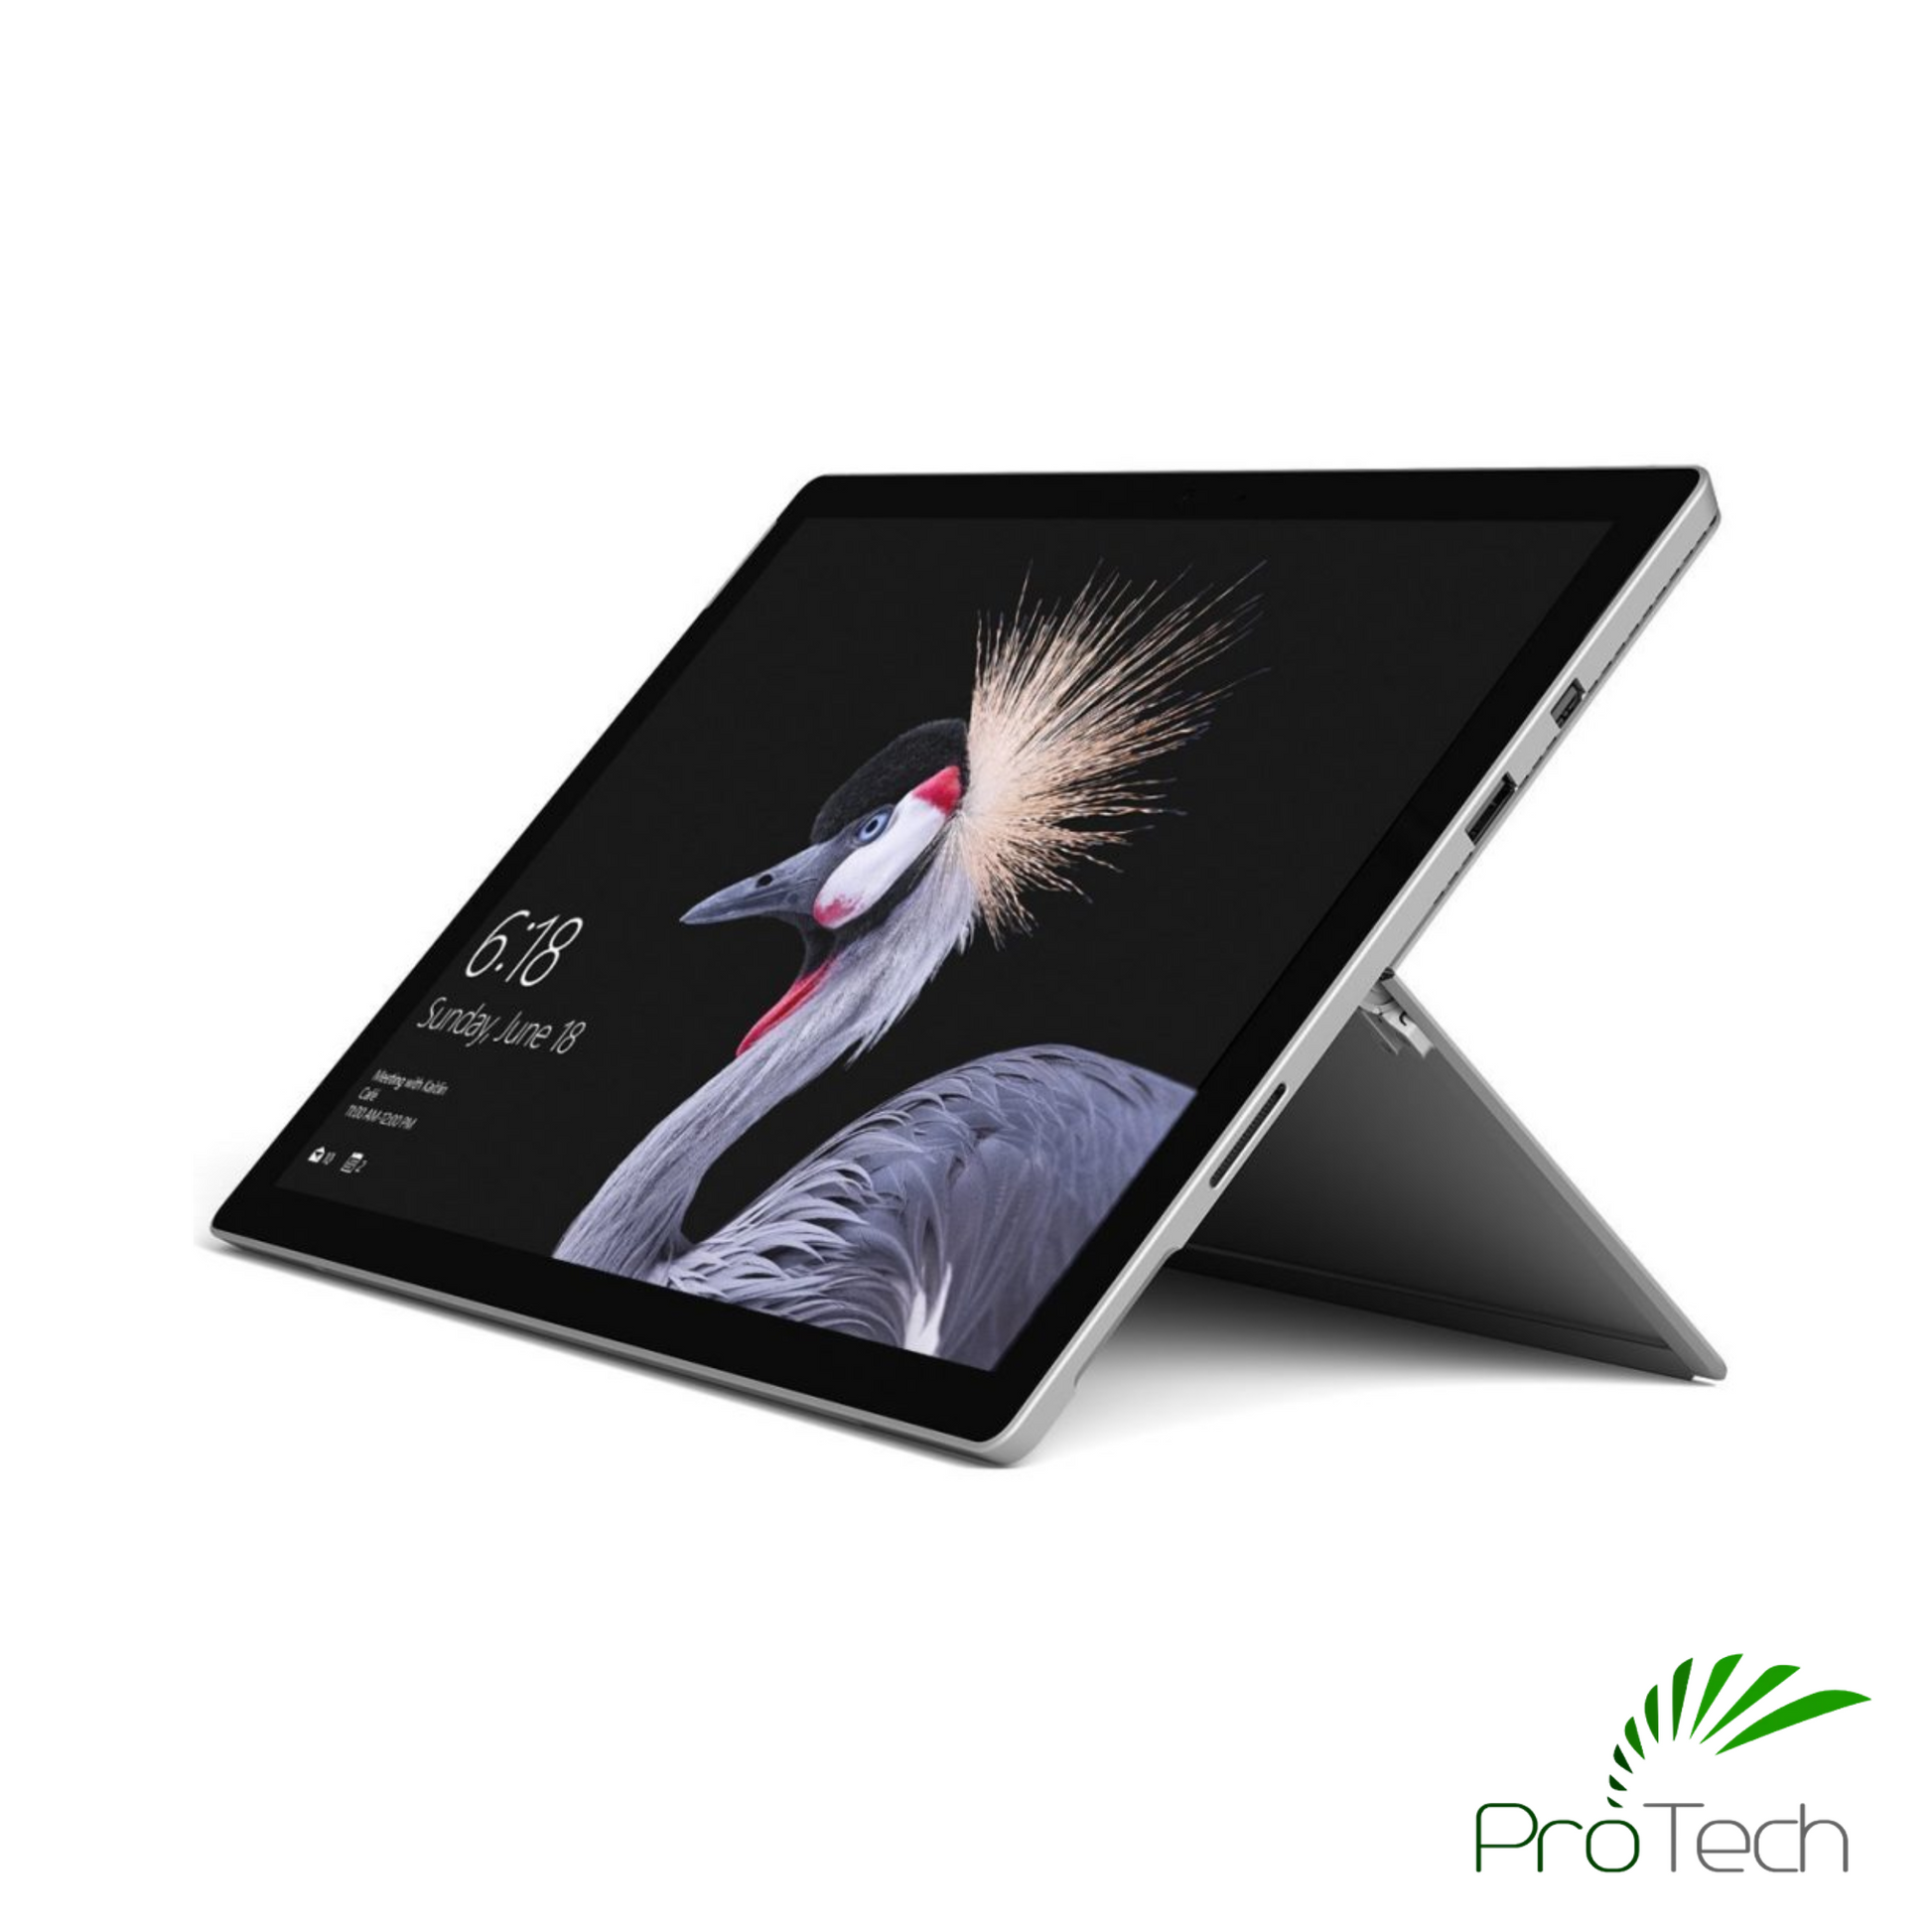 Microsoft Surface Pro 3 | Core i5 | 8GB RAM | 265GB SSD ProTech I.T. Solutions